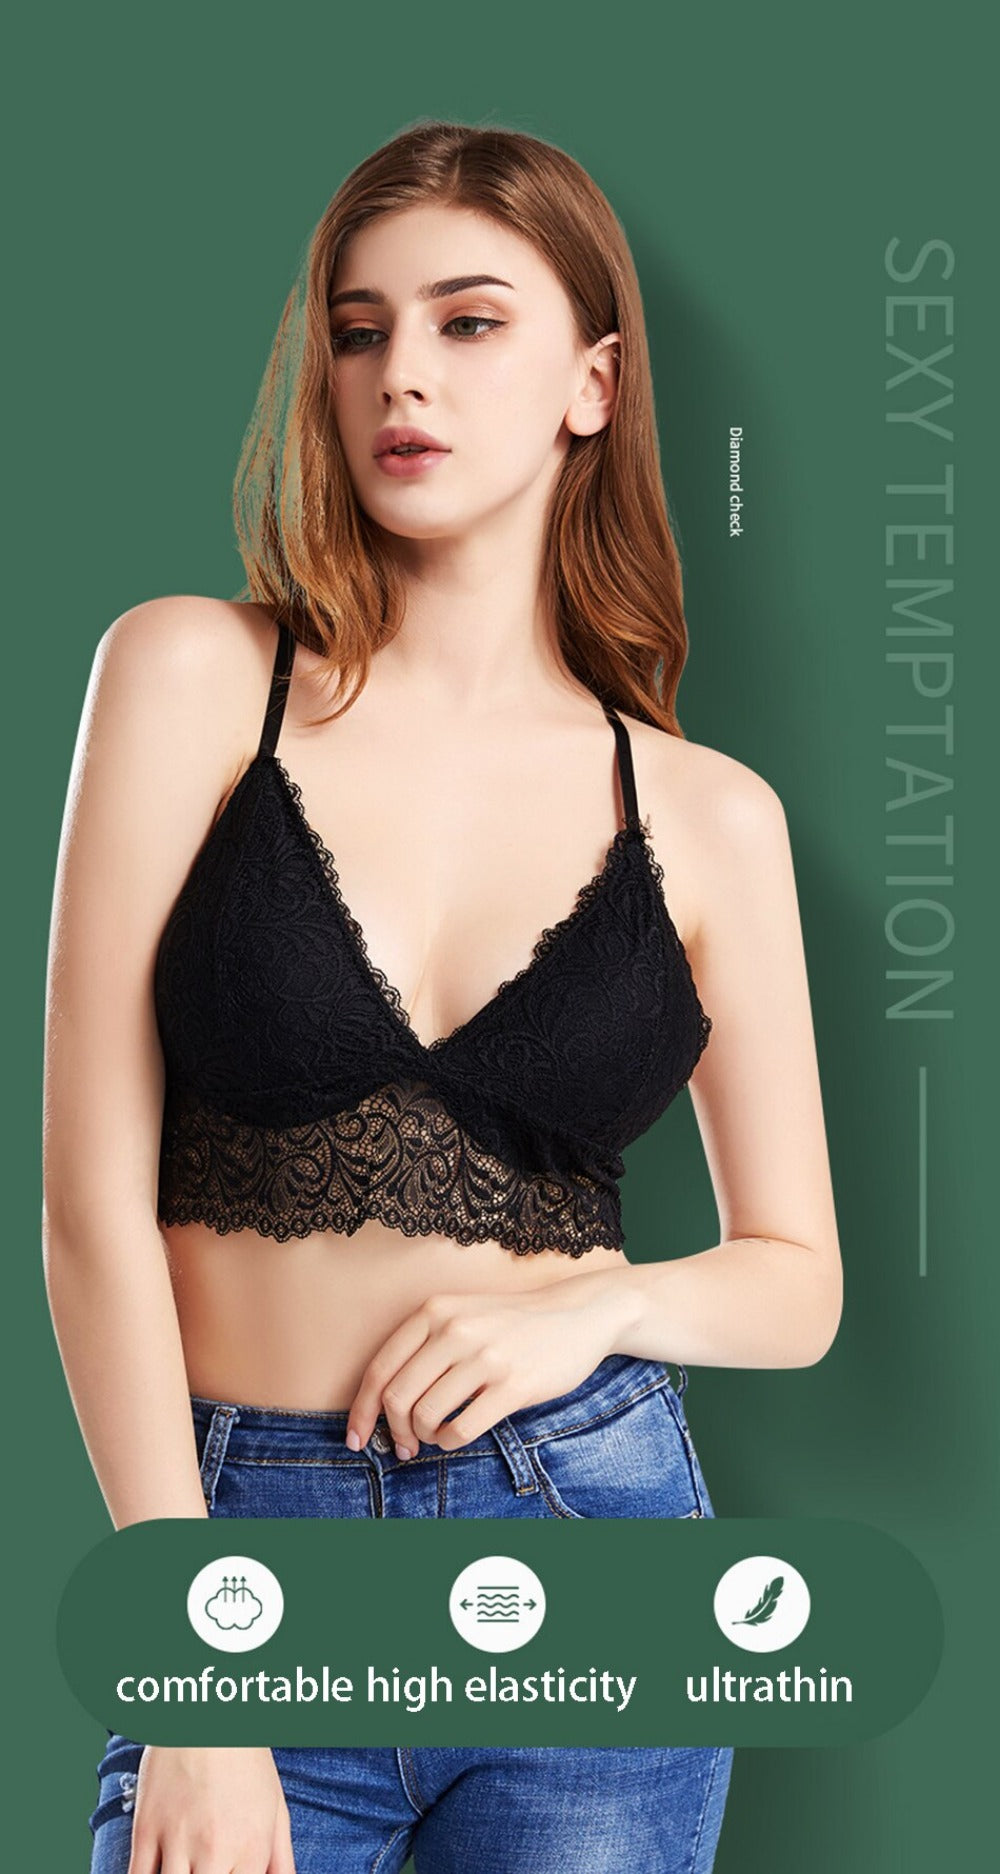 Everyday.Discount pushup bra's for women removable straps pushcap can be removed choose your favorite bra comfortable women's sportsbra straps can be adjusted three quarter cupshape bra supplies underwear for everyday 